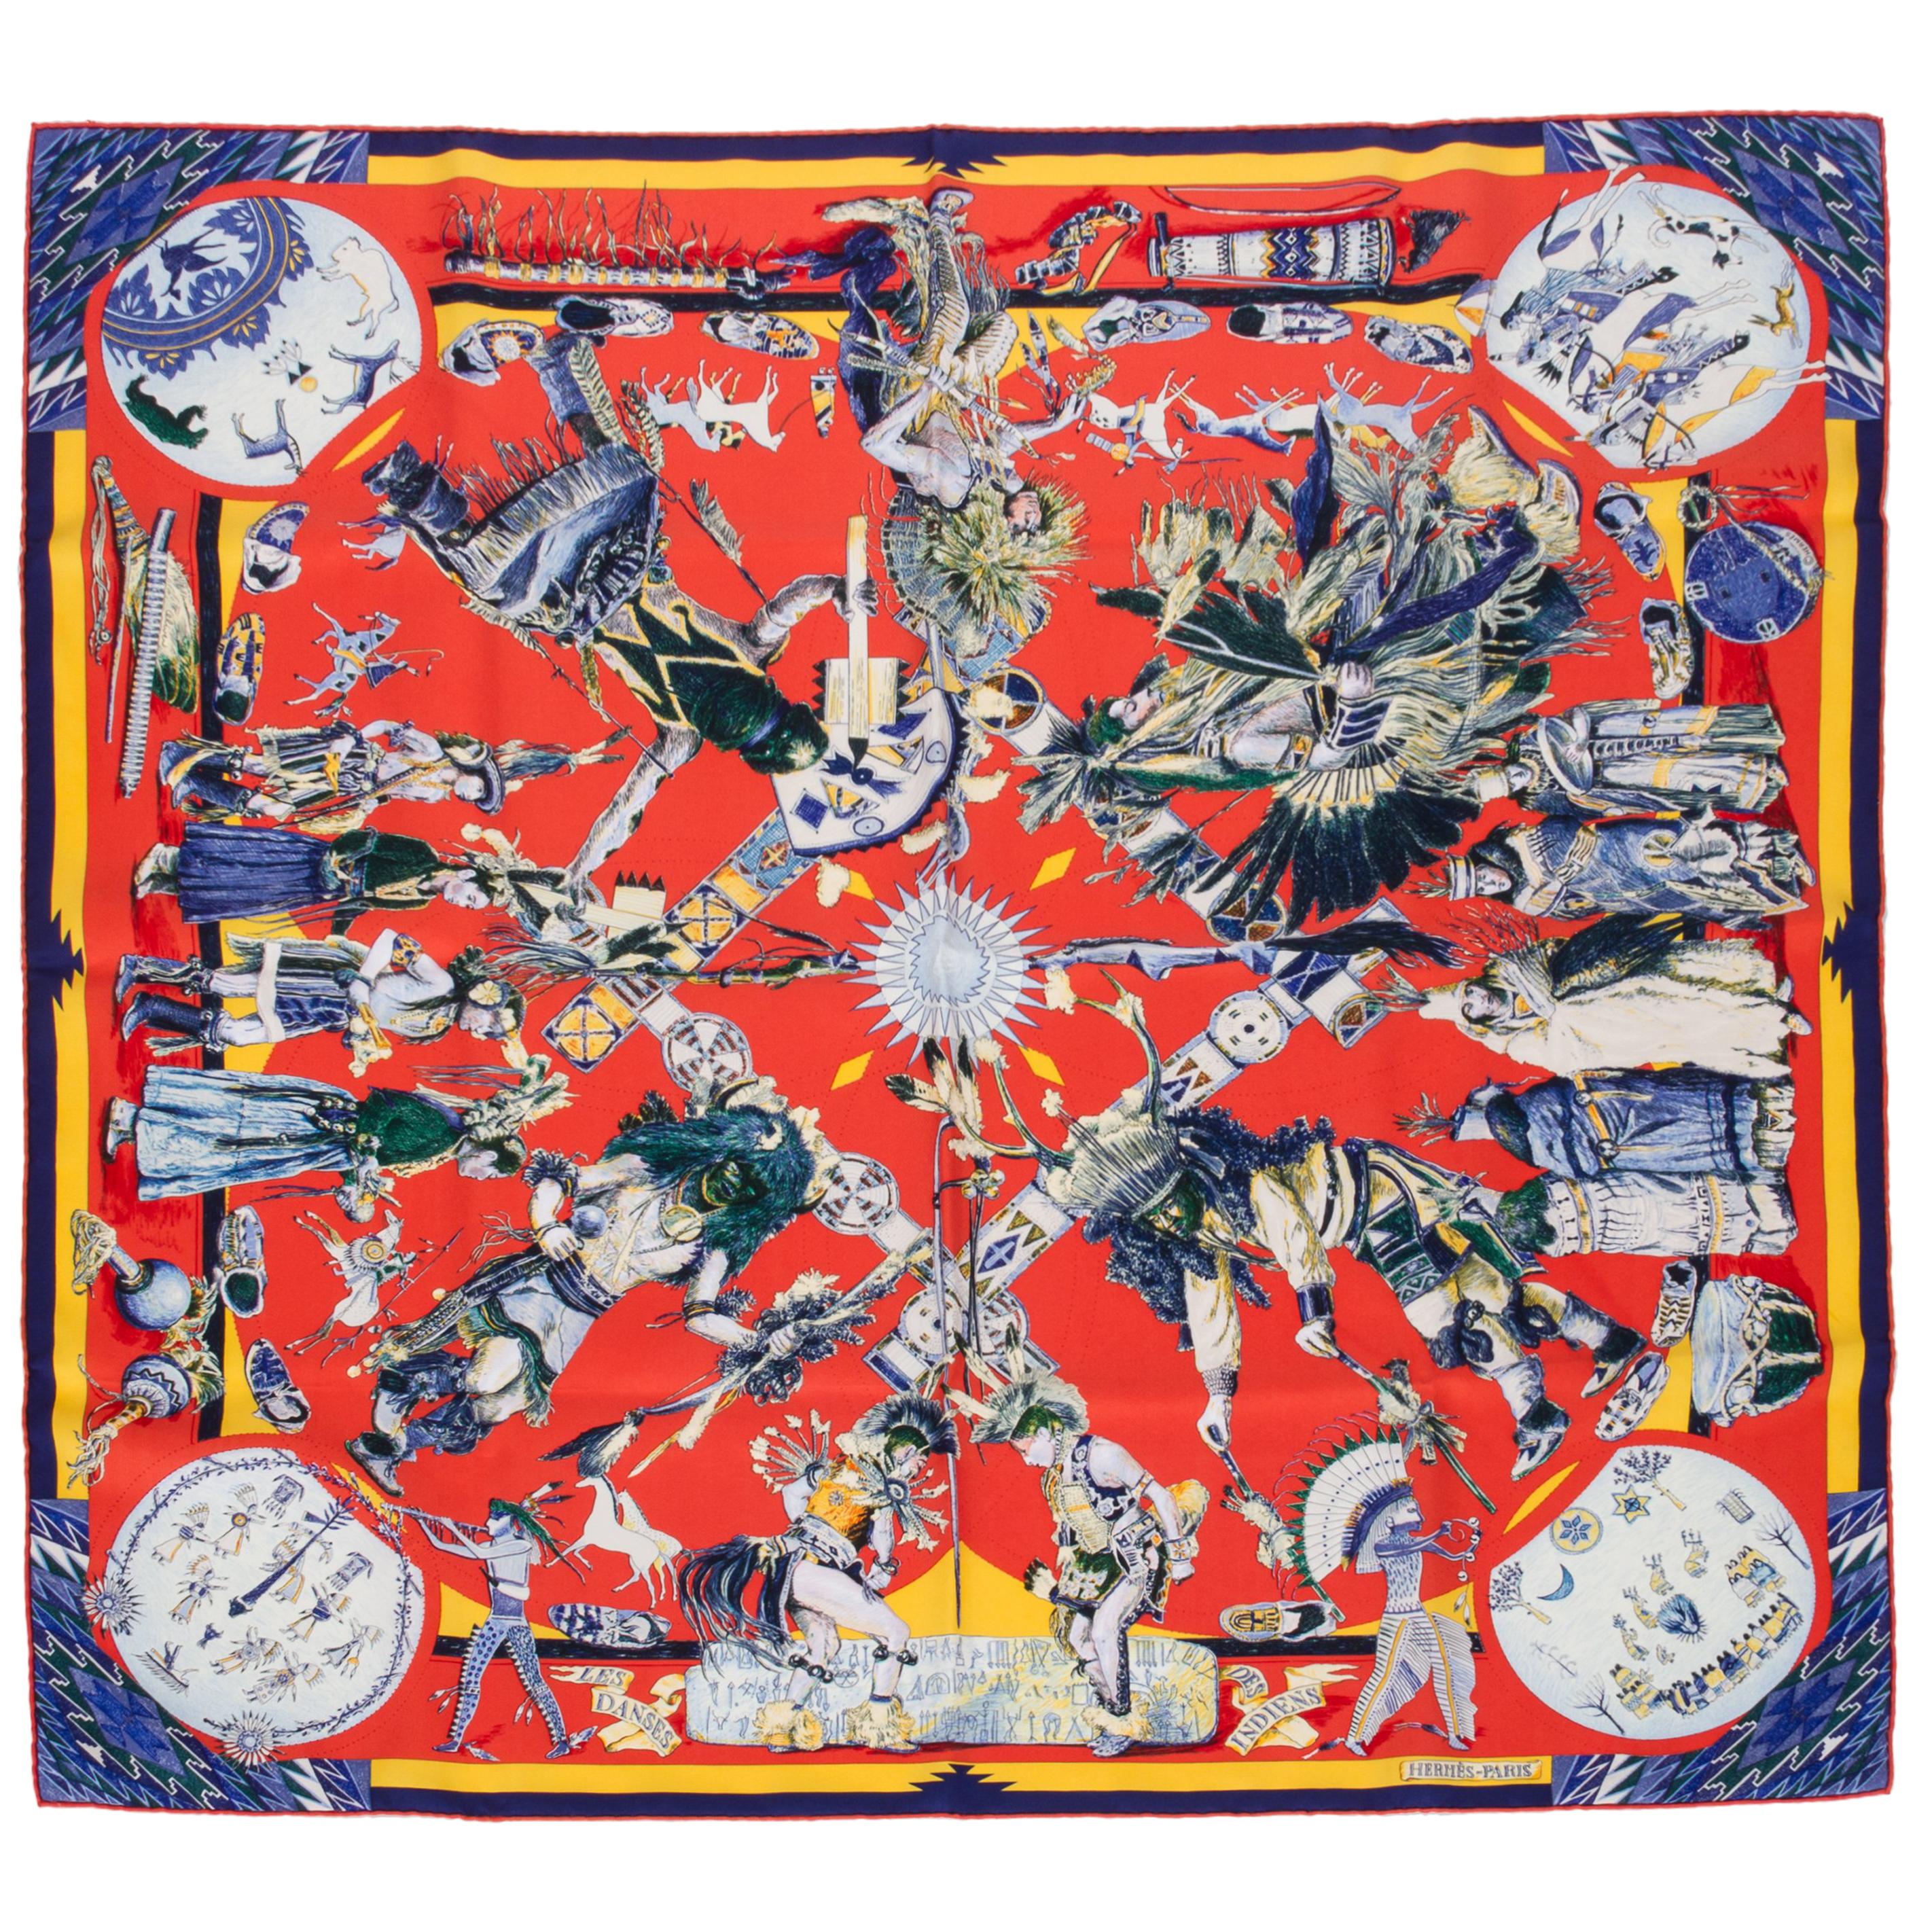 New in Box Collectible Hermes Les Danses des Indiens Scarf